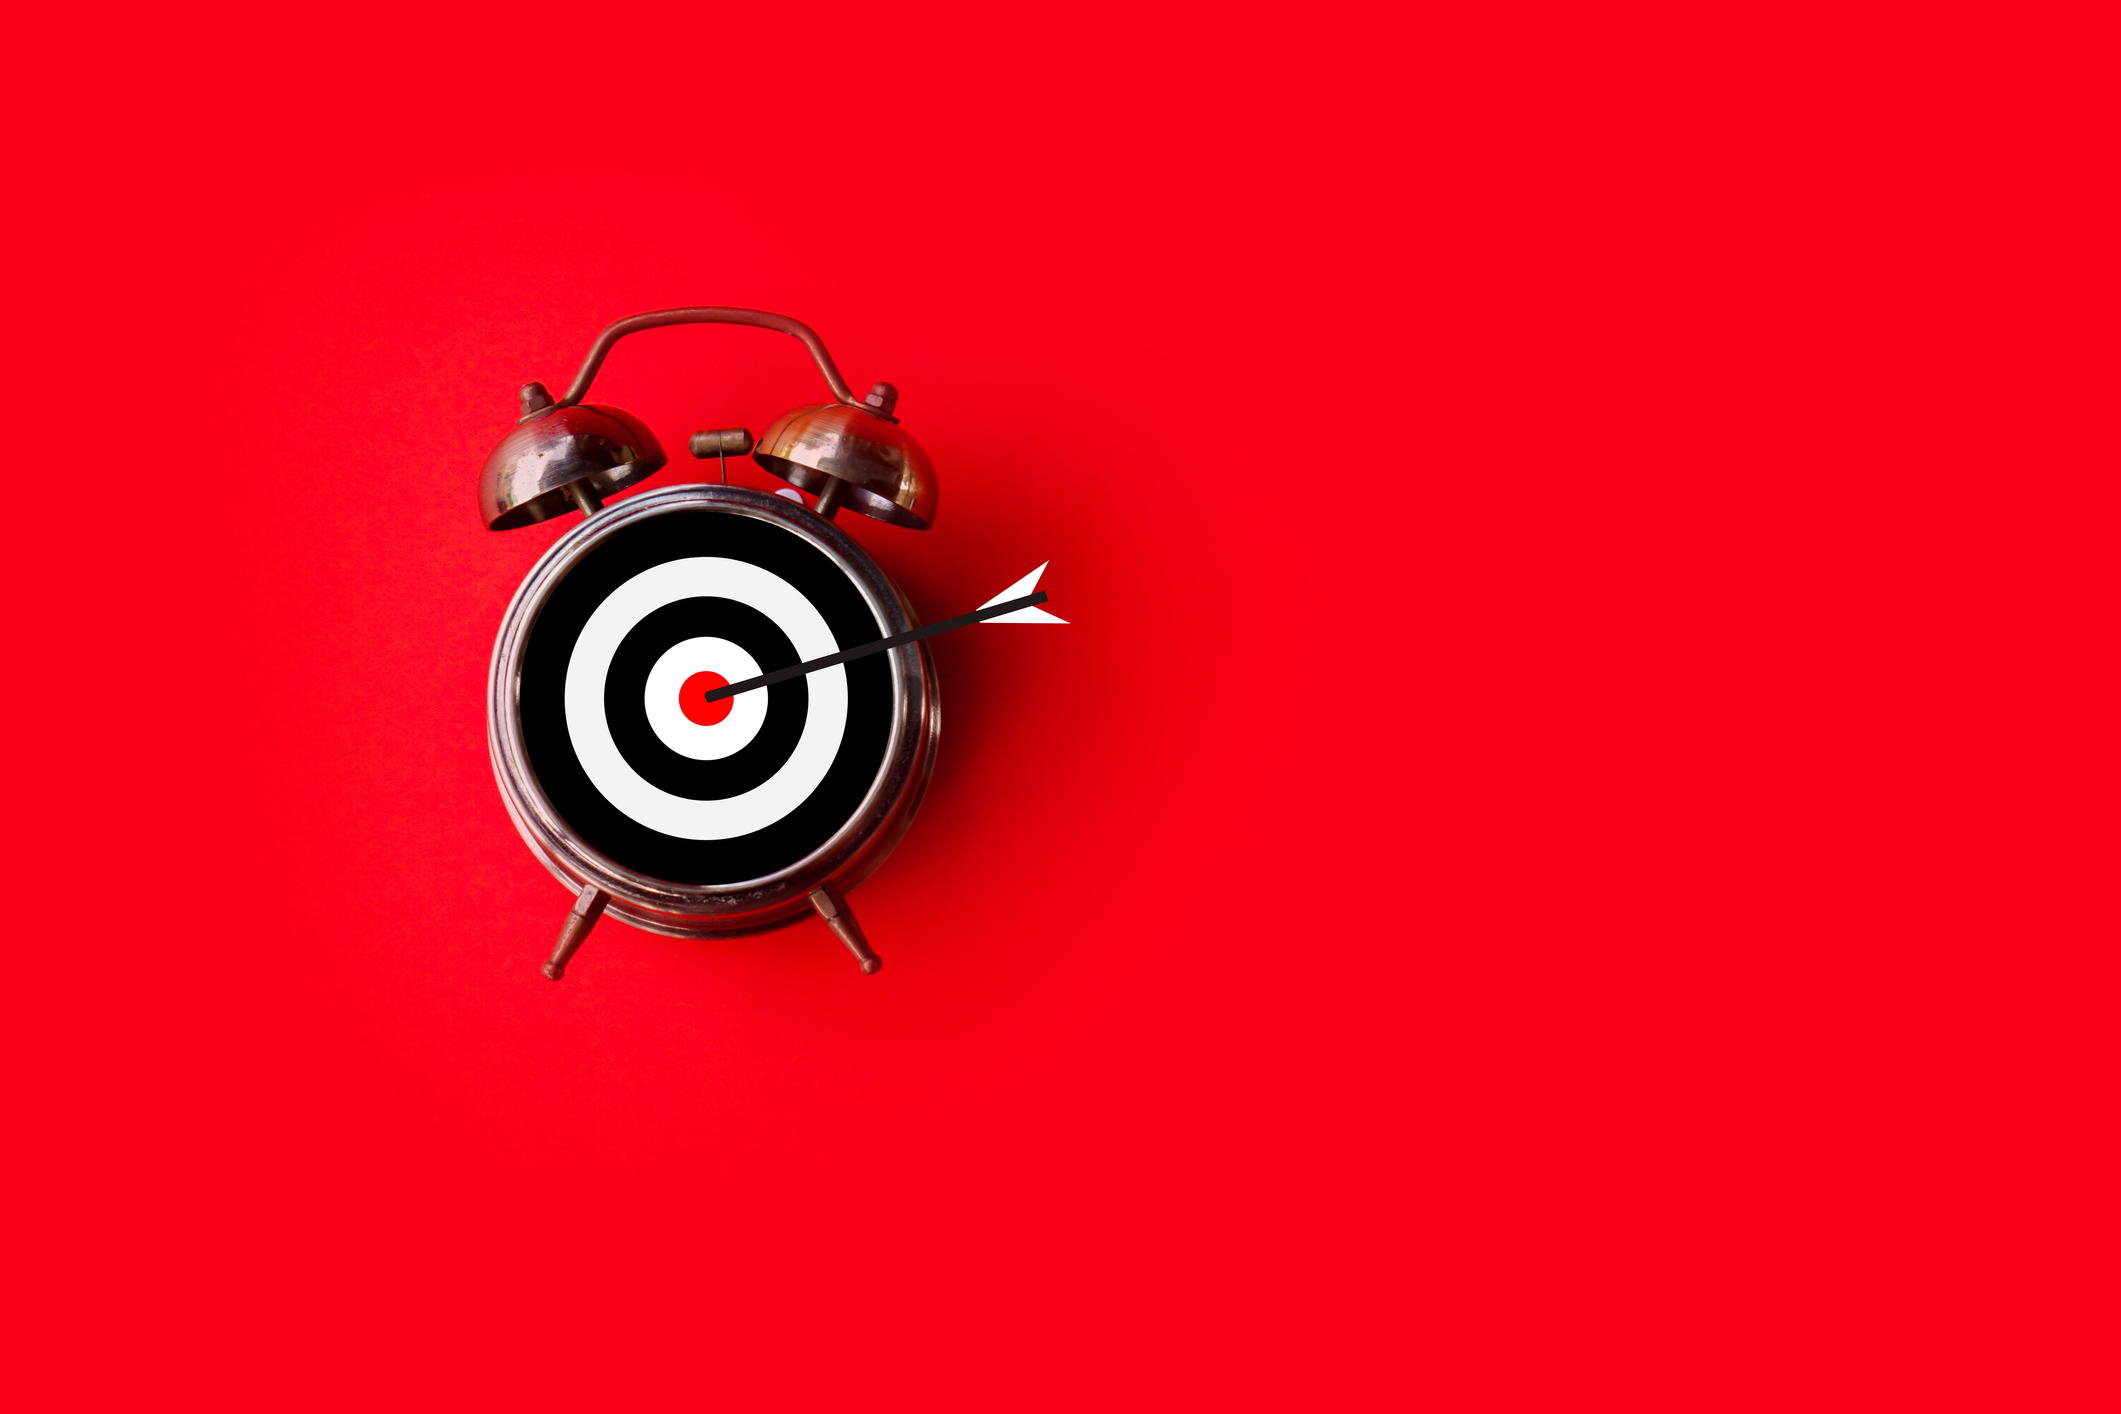 Target Time, Goal Sign On Clock Face Over Red Background